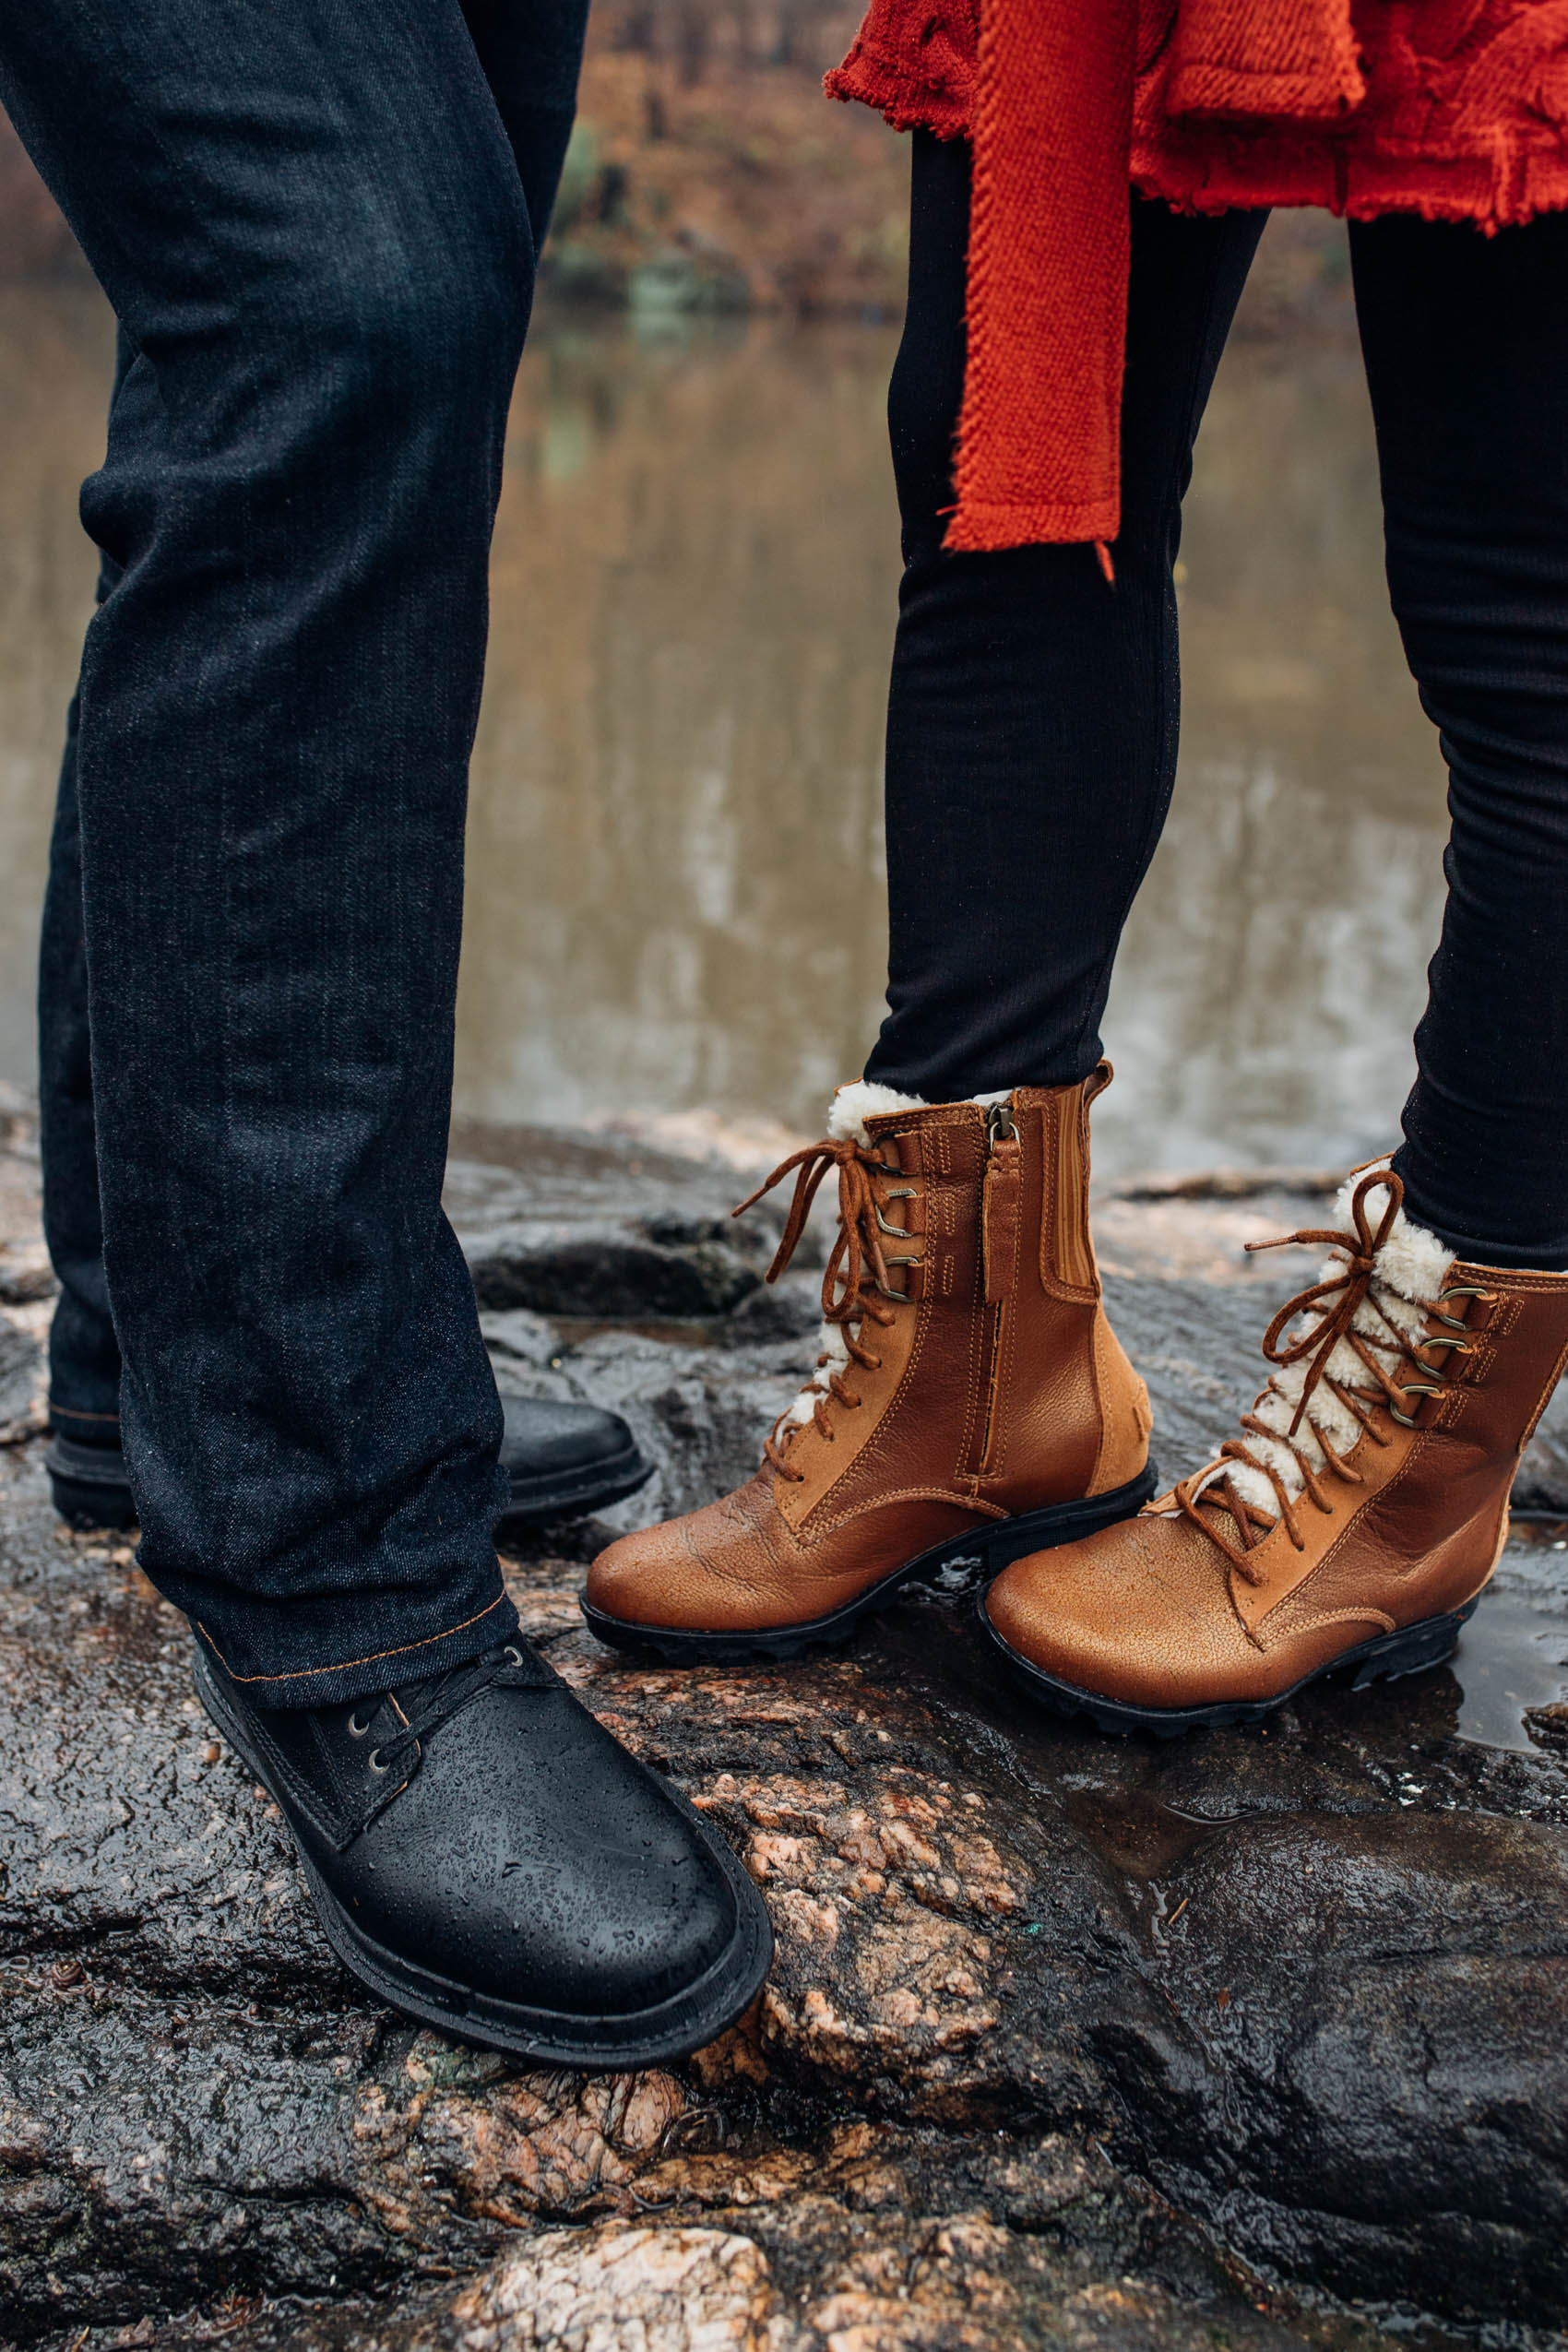 Blogger Hoang-Kim and her boyfriend wears Sorel Footwear during a winter trip to New York City